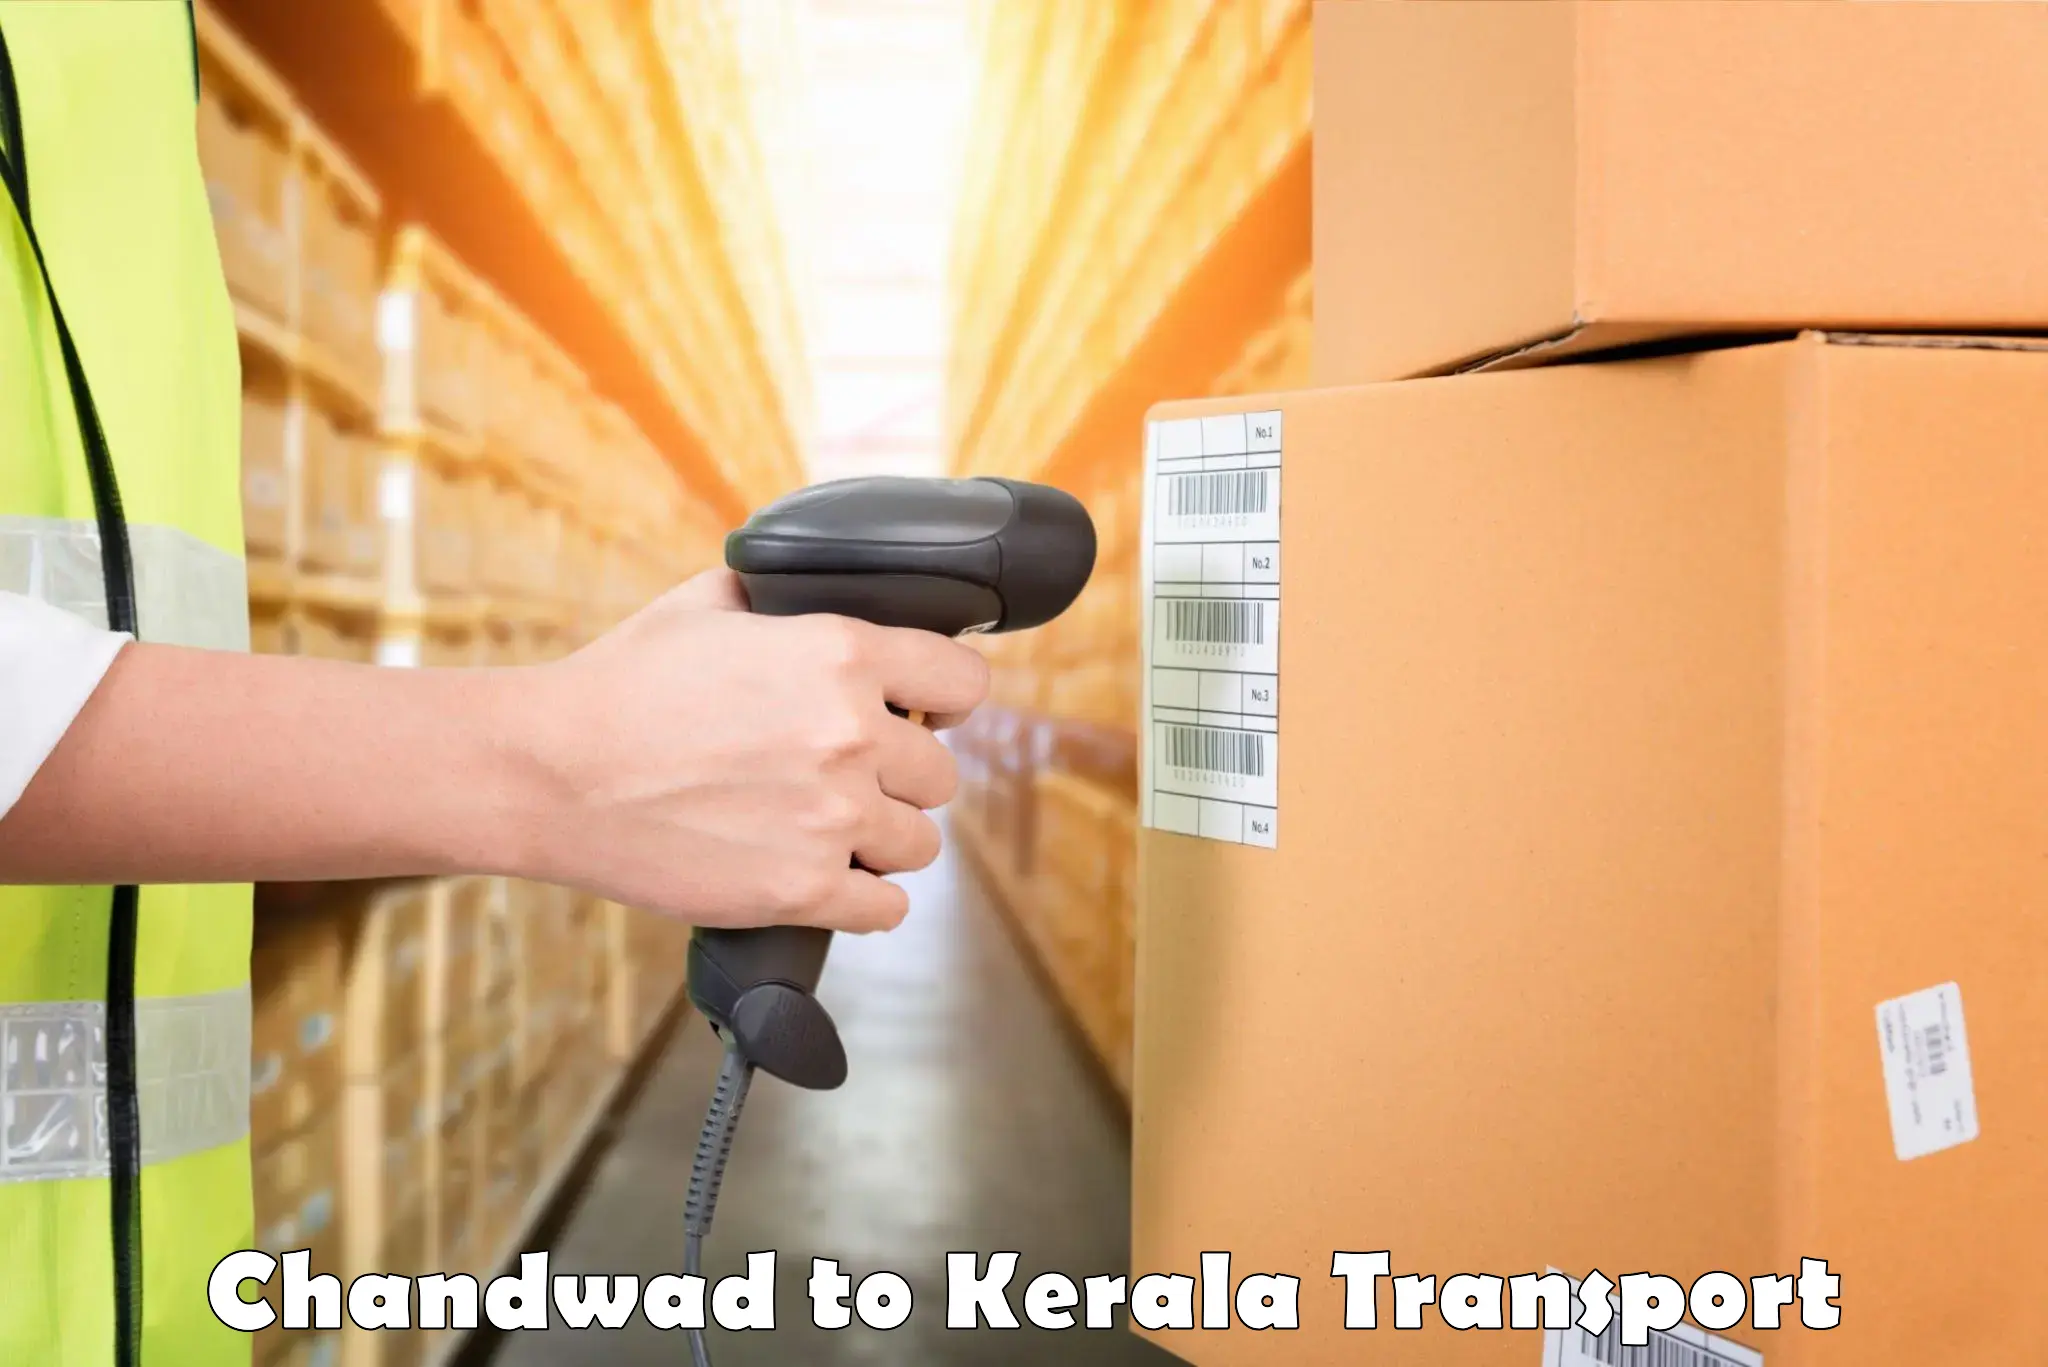 Goods delivery service Chandwad to Calicut